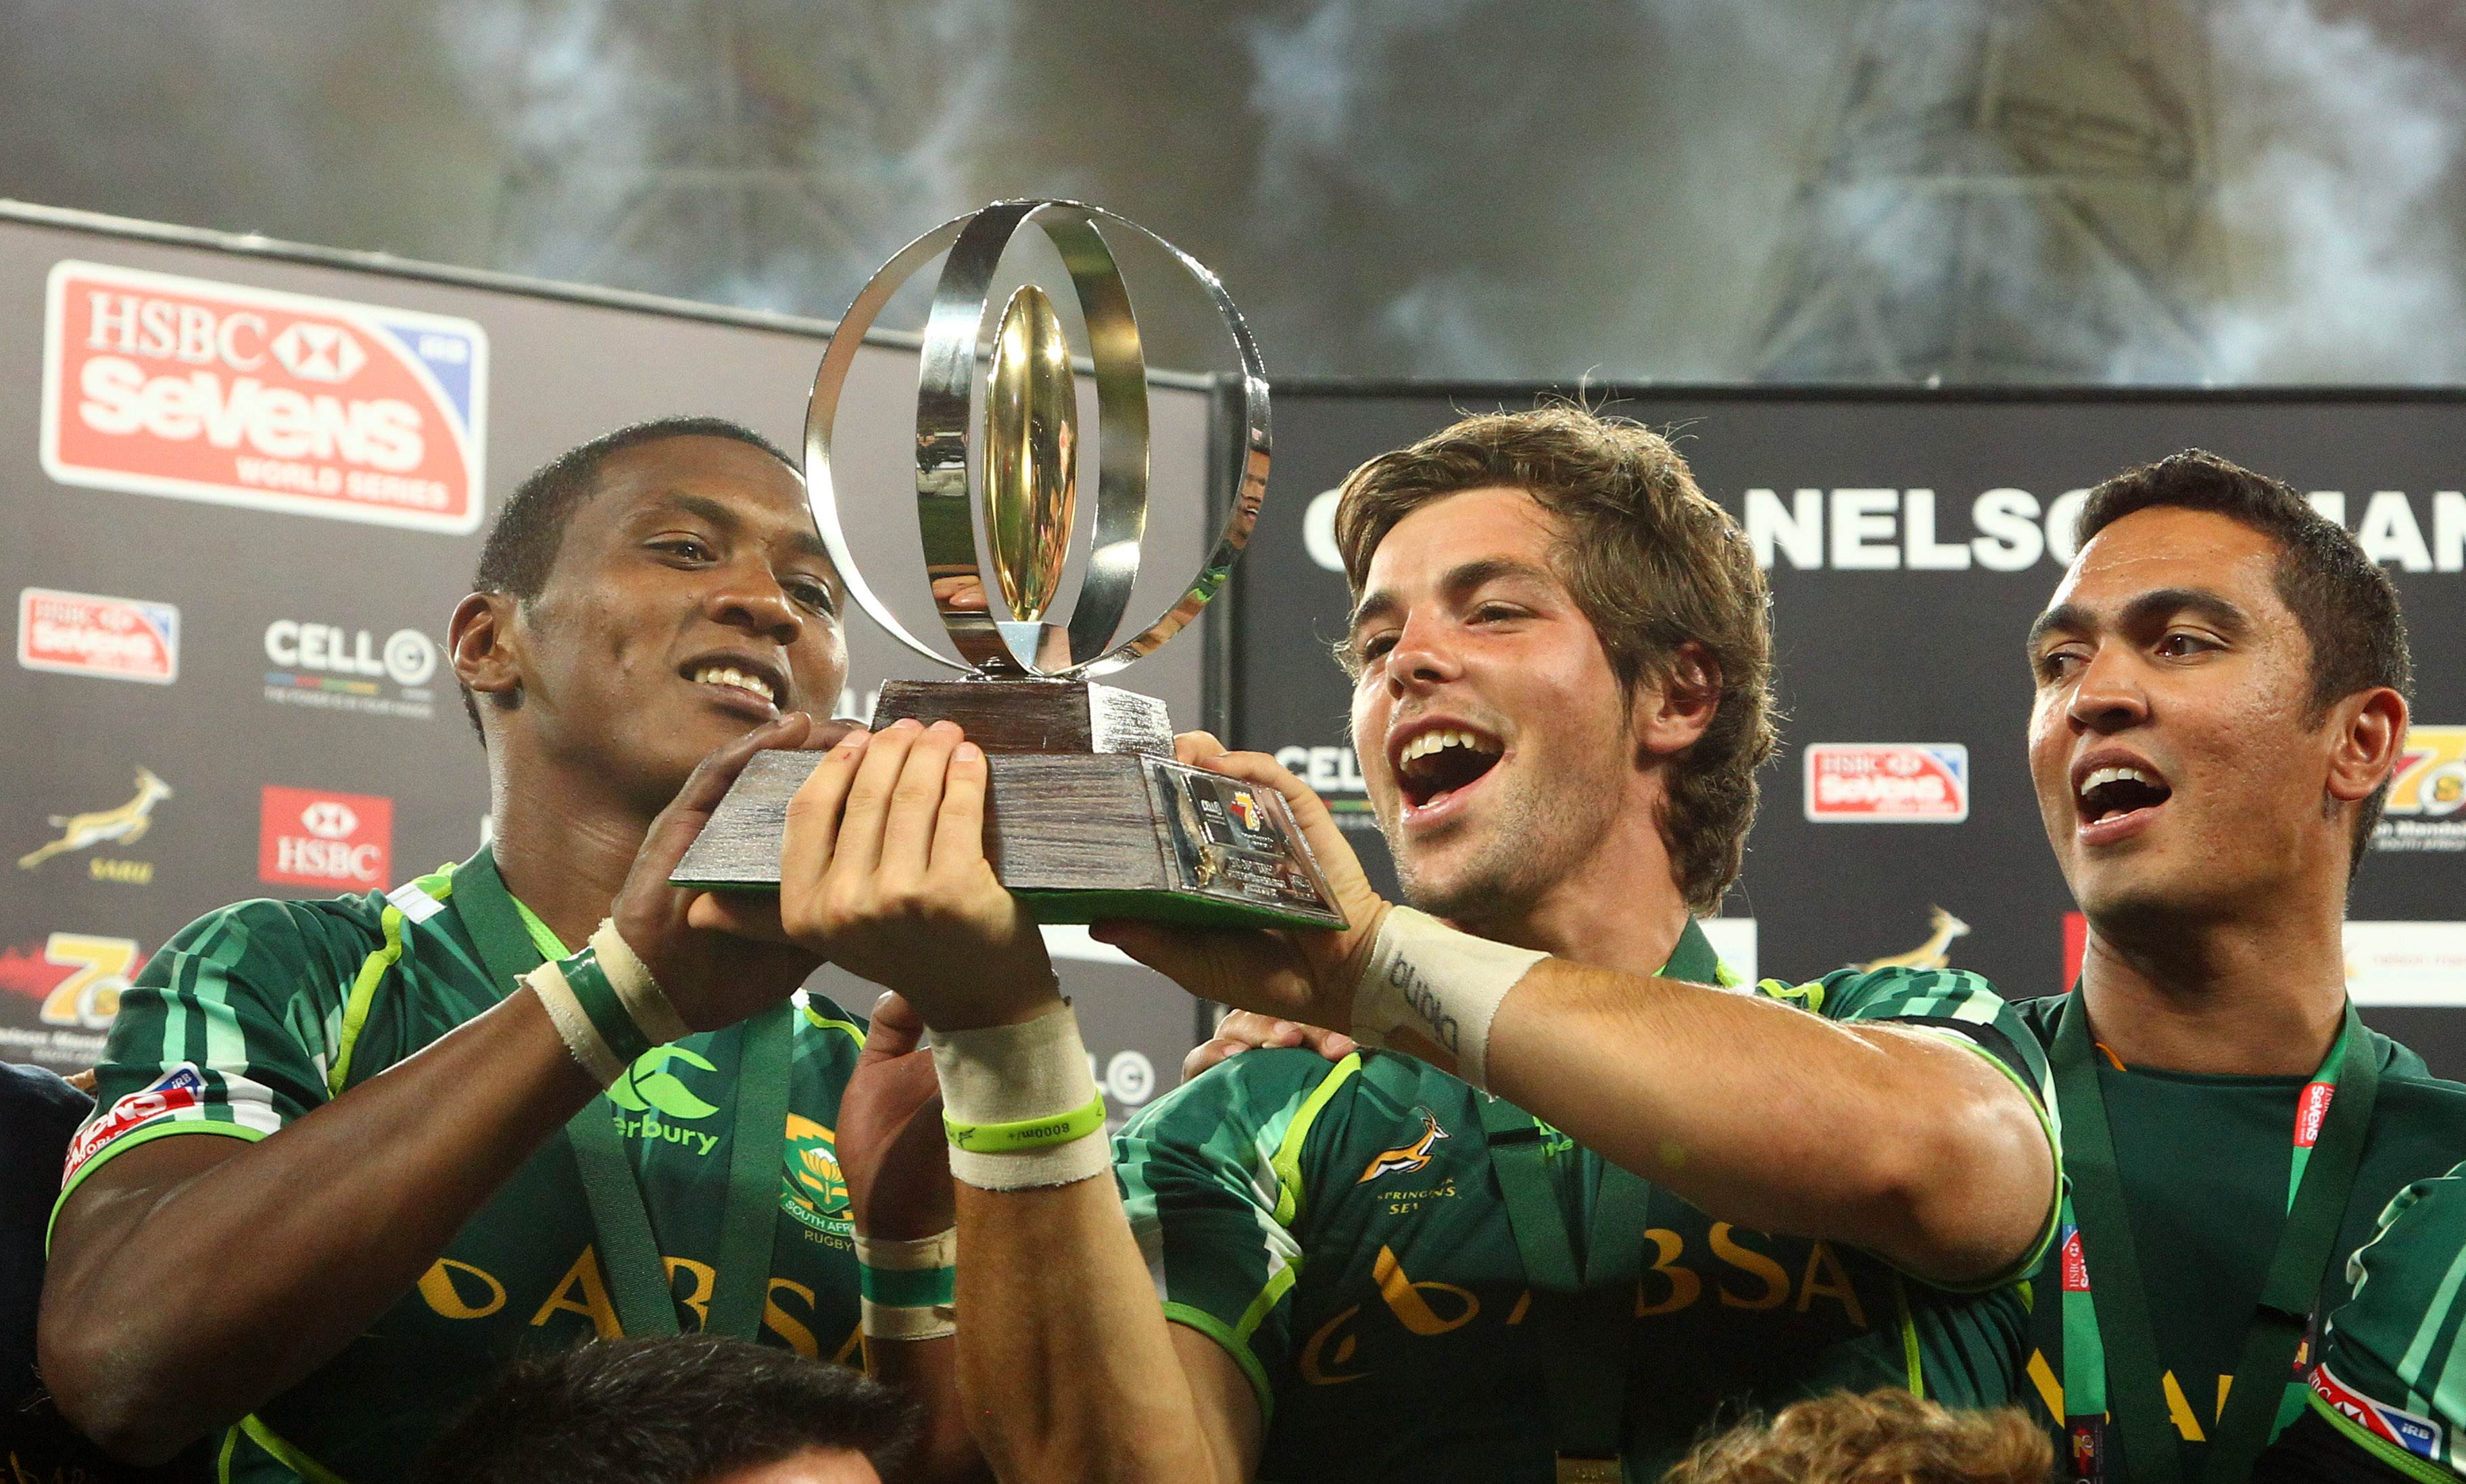 South Africa's players celebrate with the trophy after winning the final against New Zealand at the IRB Sevens at the Nelson Mandela Bay Stadium in Port Elizabeth. Photo: AFP